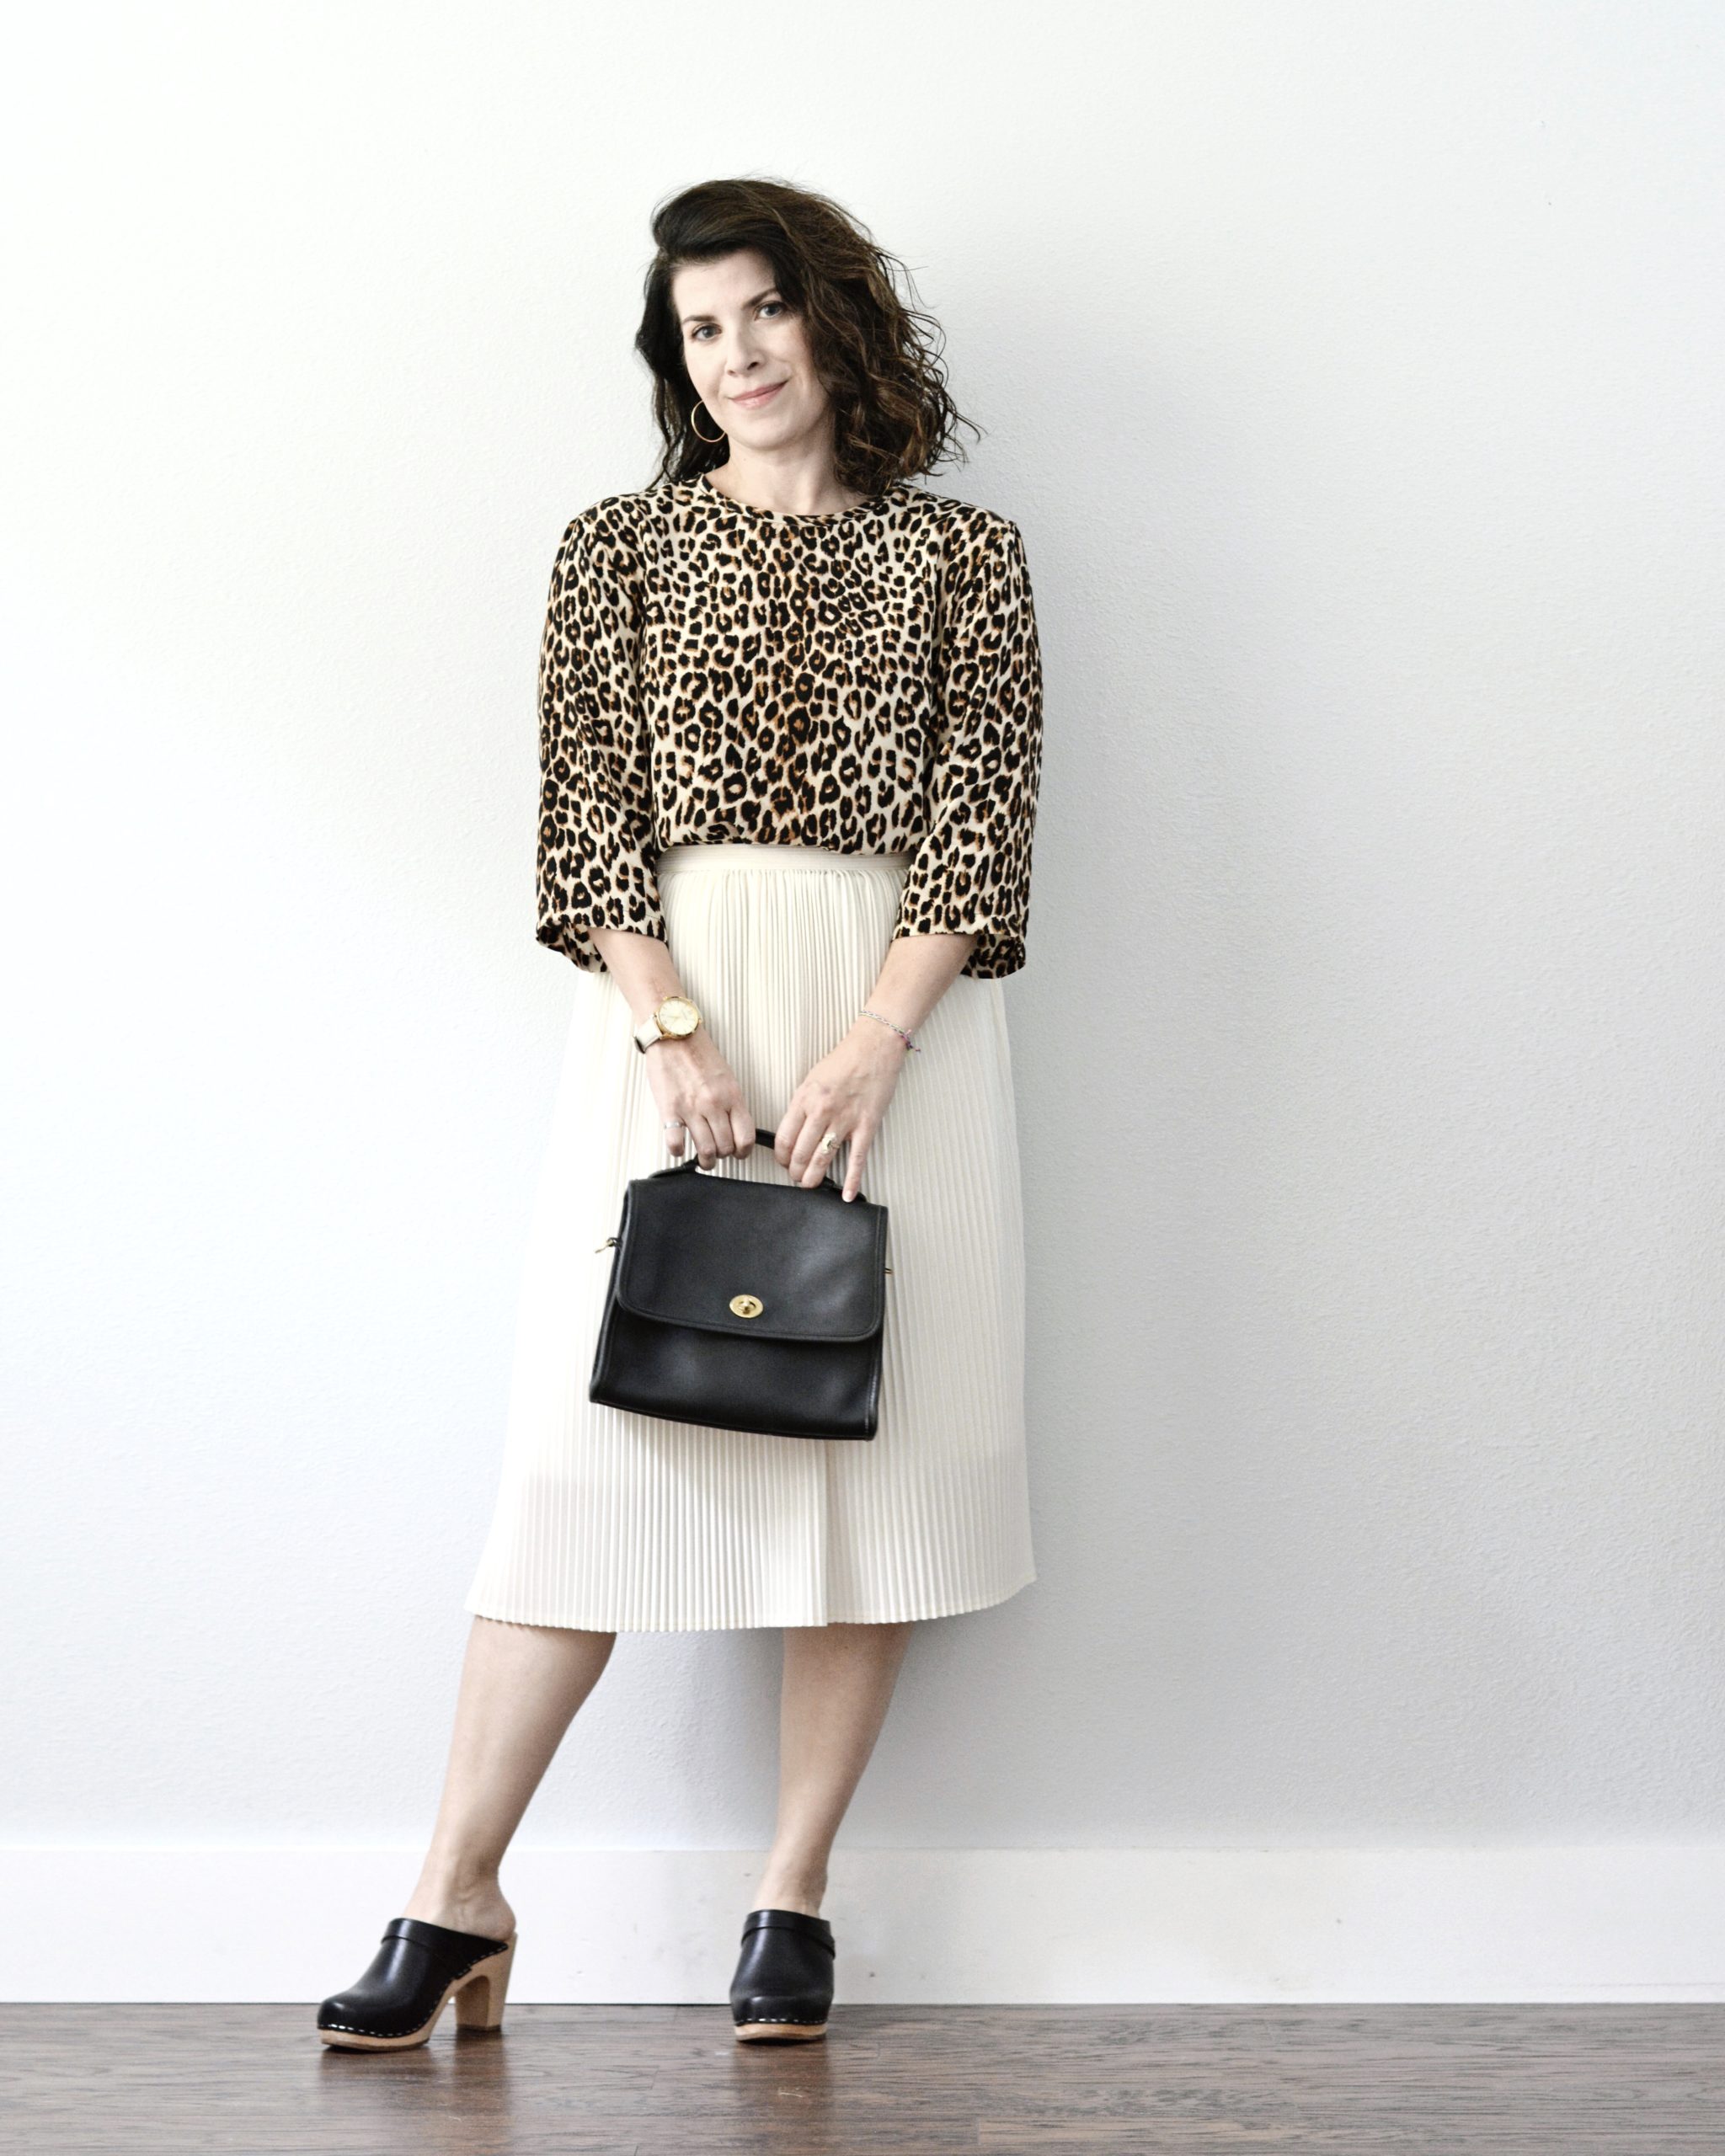 A woman is standing in front of a light grey wall. She is wearing a leopard print dress tucked into a white pleated skirt. She is holding a black handbag with both hands and she is wearing black clog shoes.